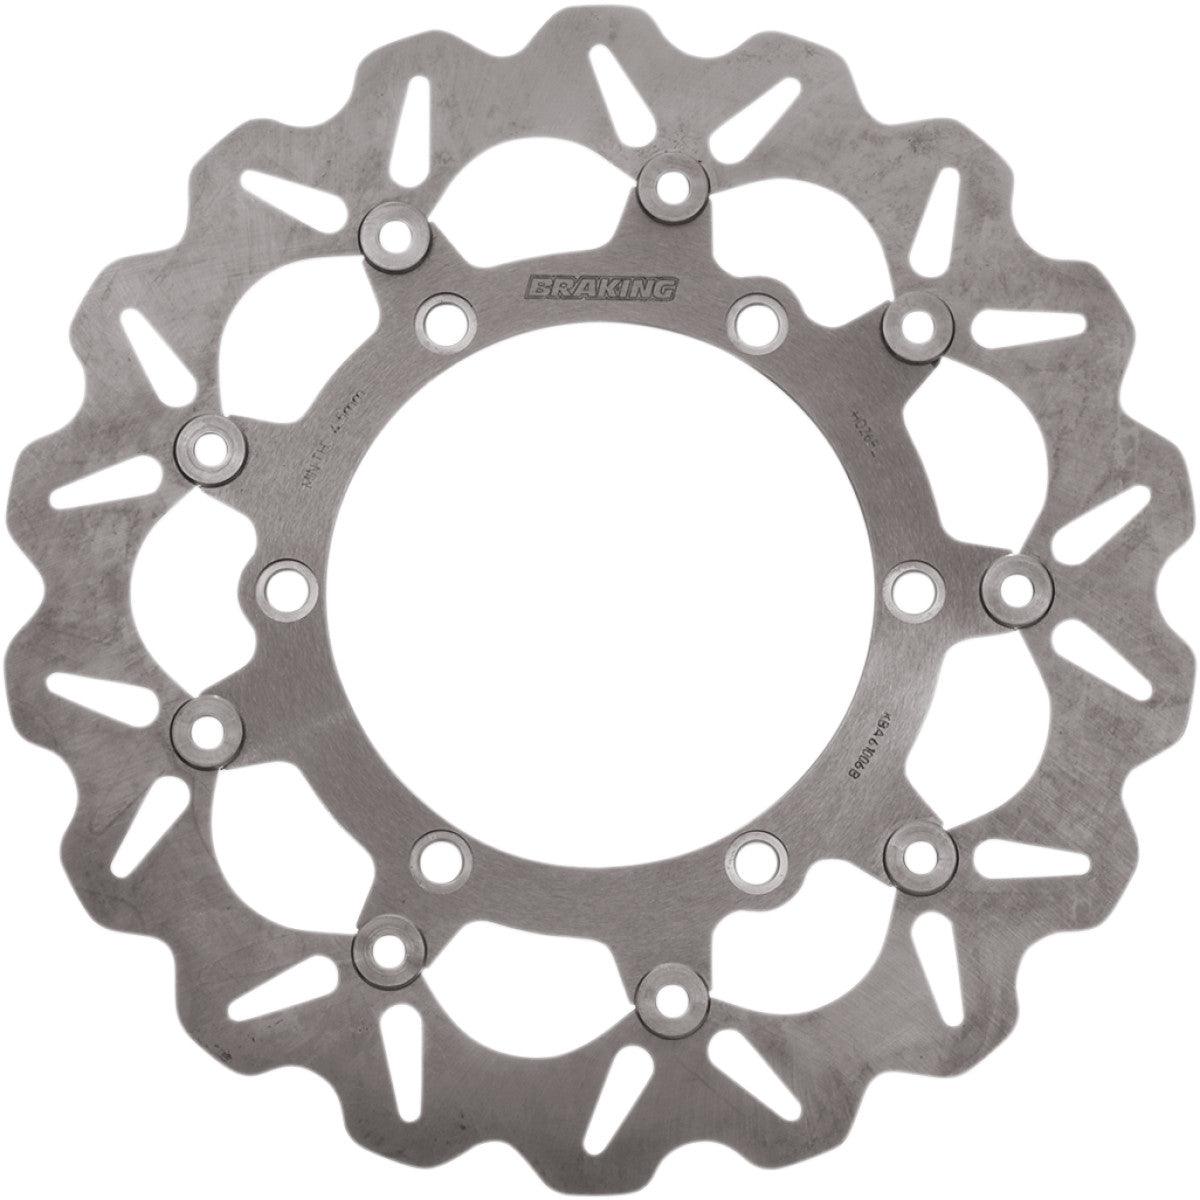 STX Front Brake Rotor by Braking for Triumph Motorcycles